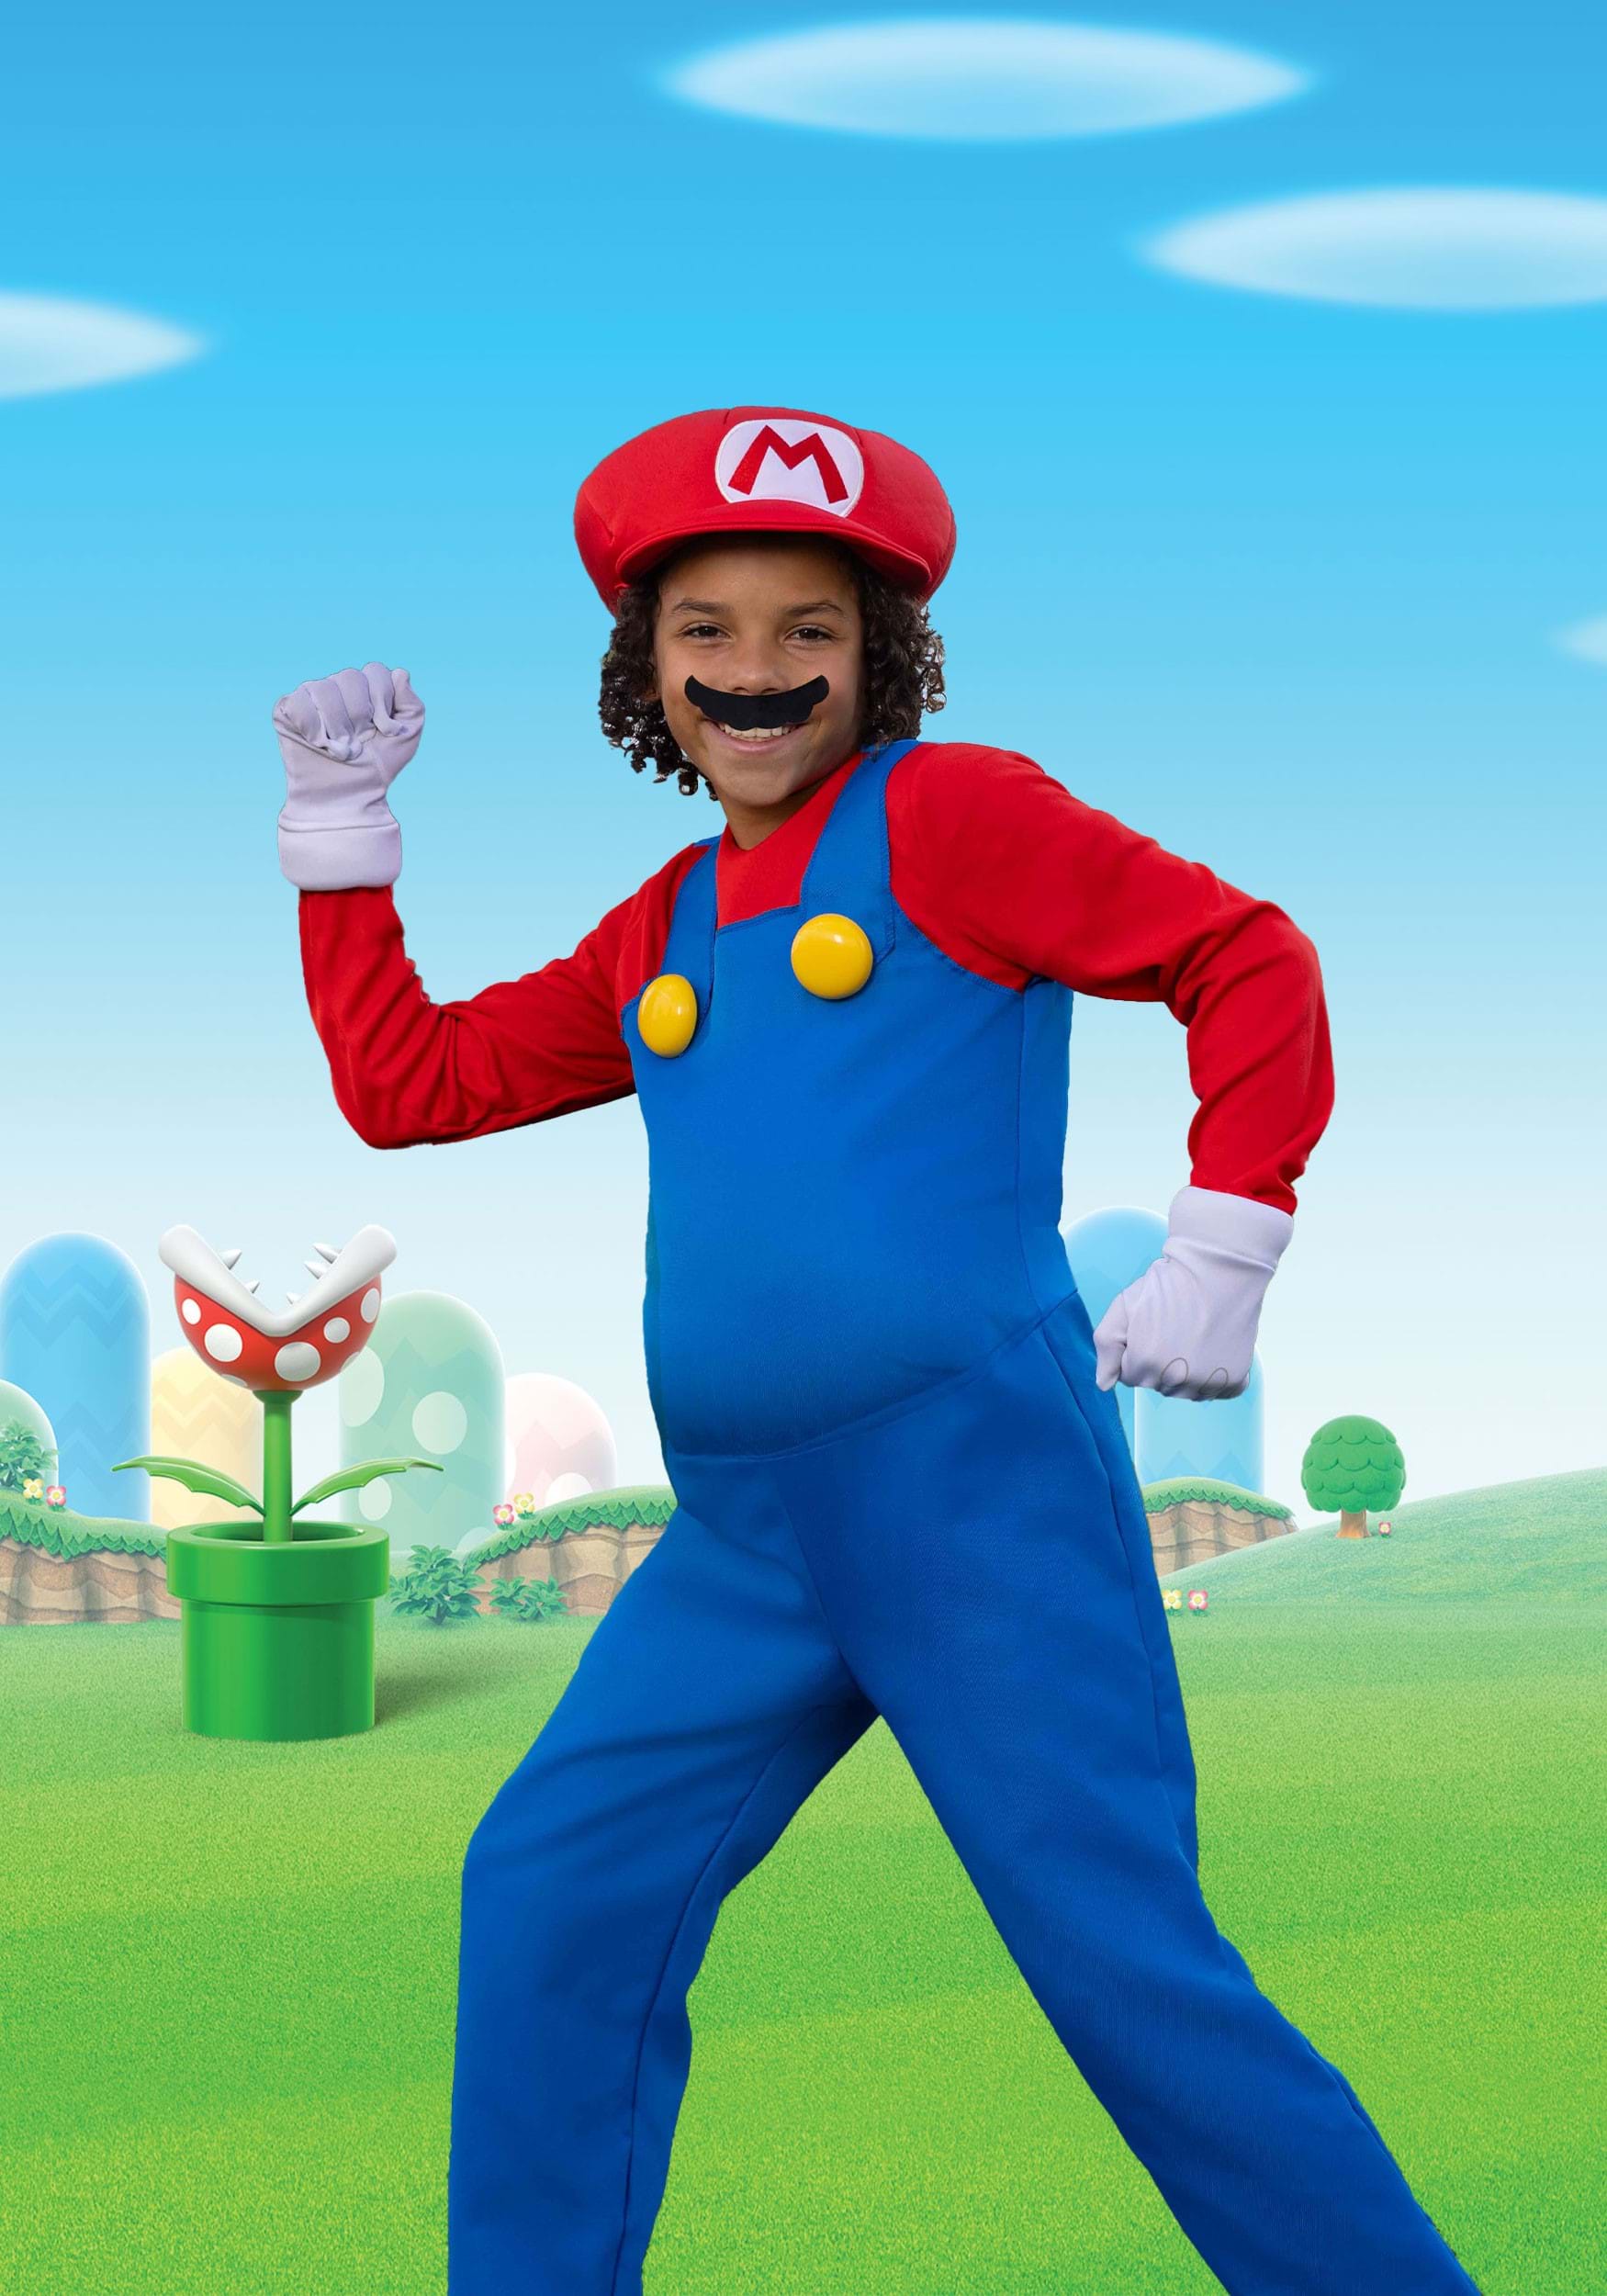 https://images.halloweencostumes.com/products/59585/1-1/super-mario-brothers-boys-mario-deluxe-costume.jpg